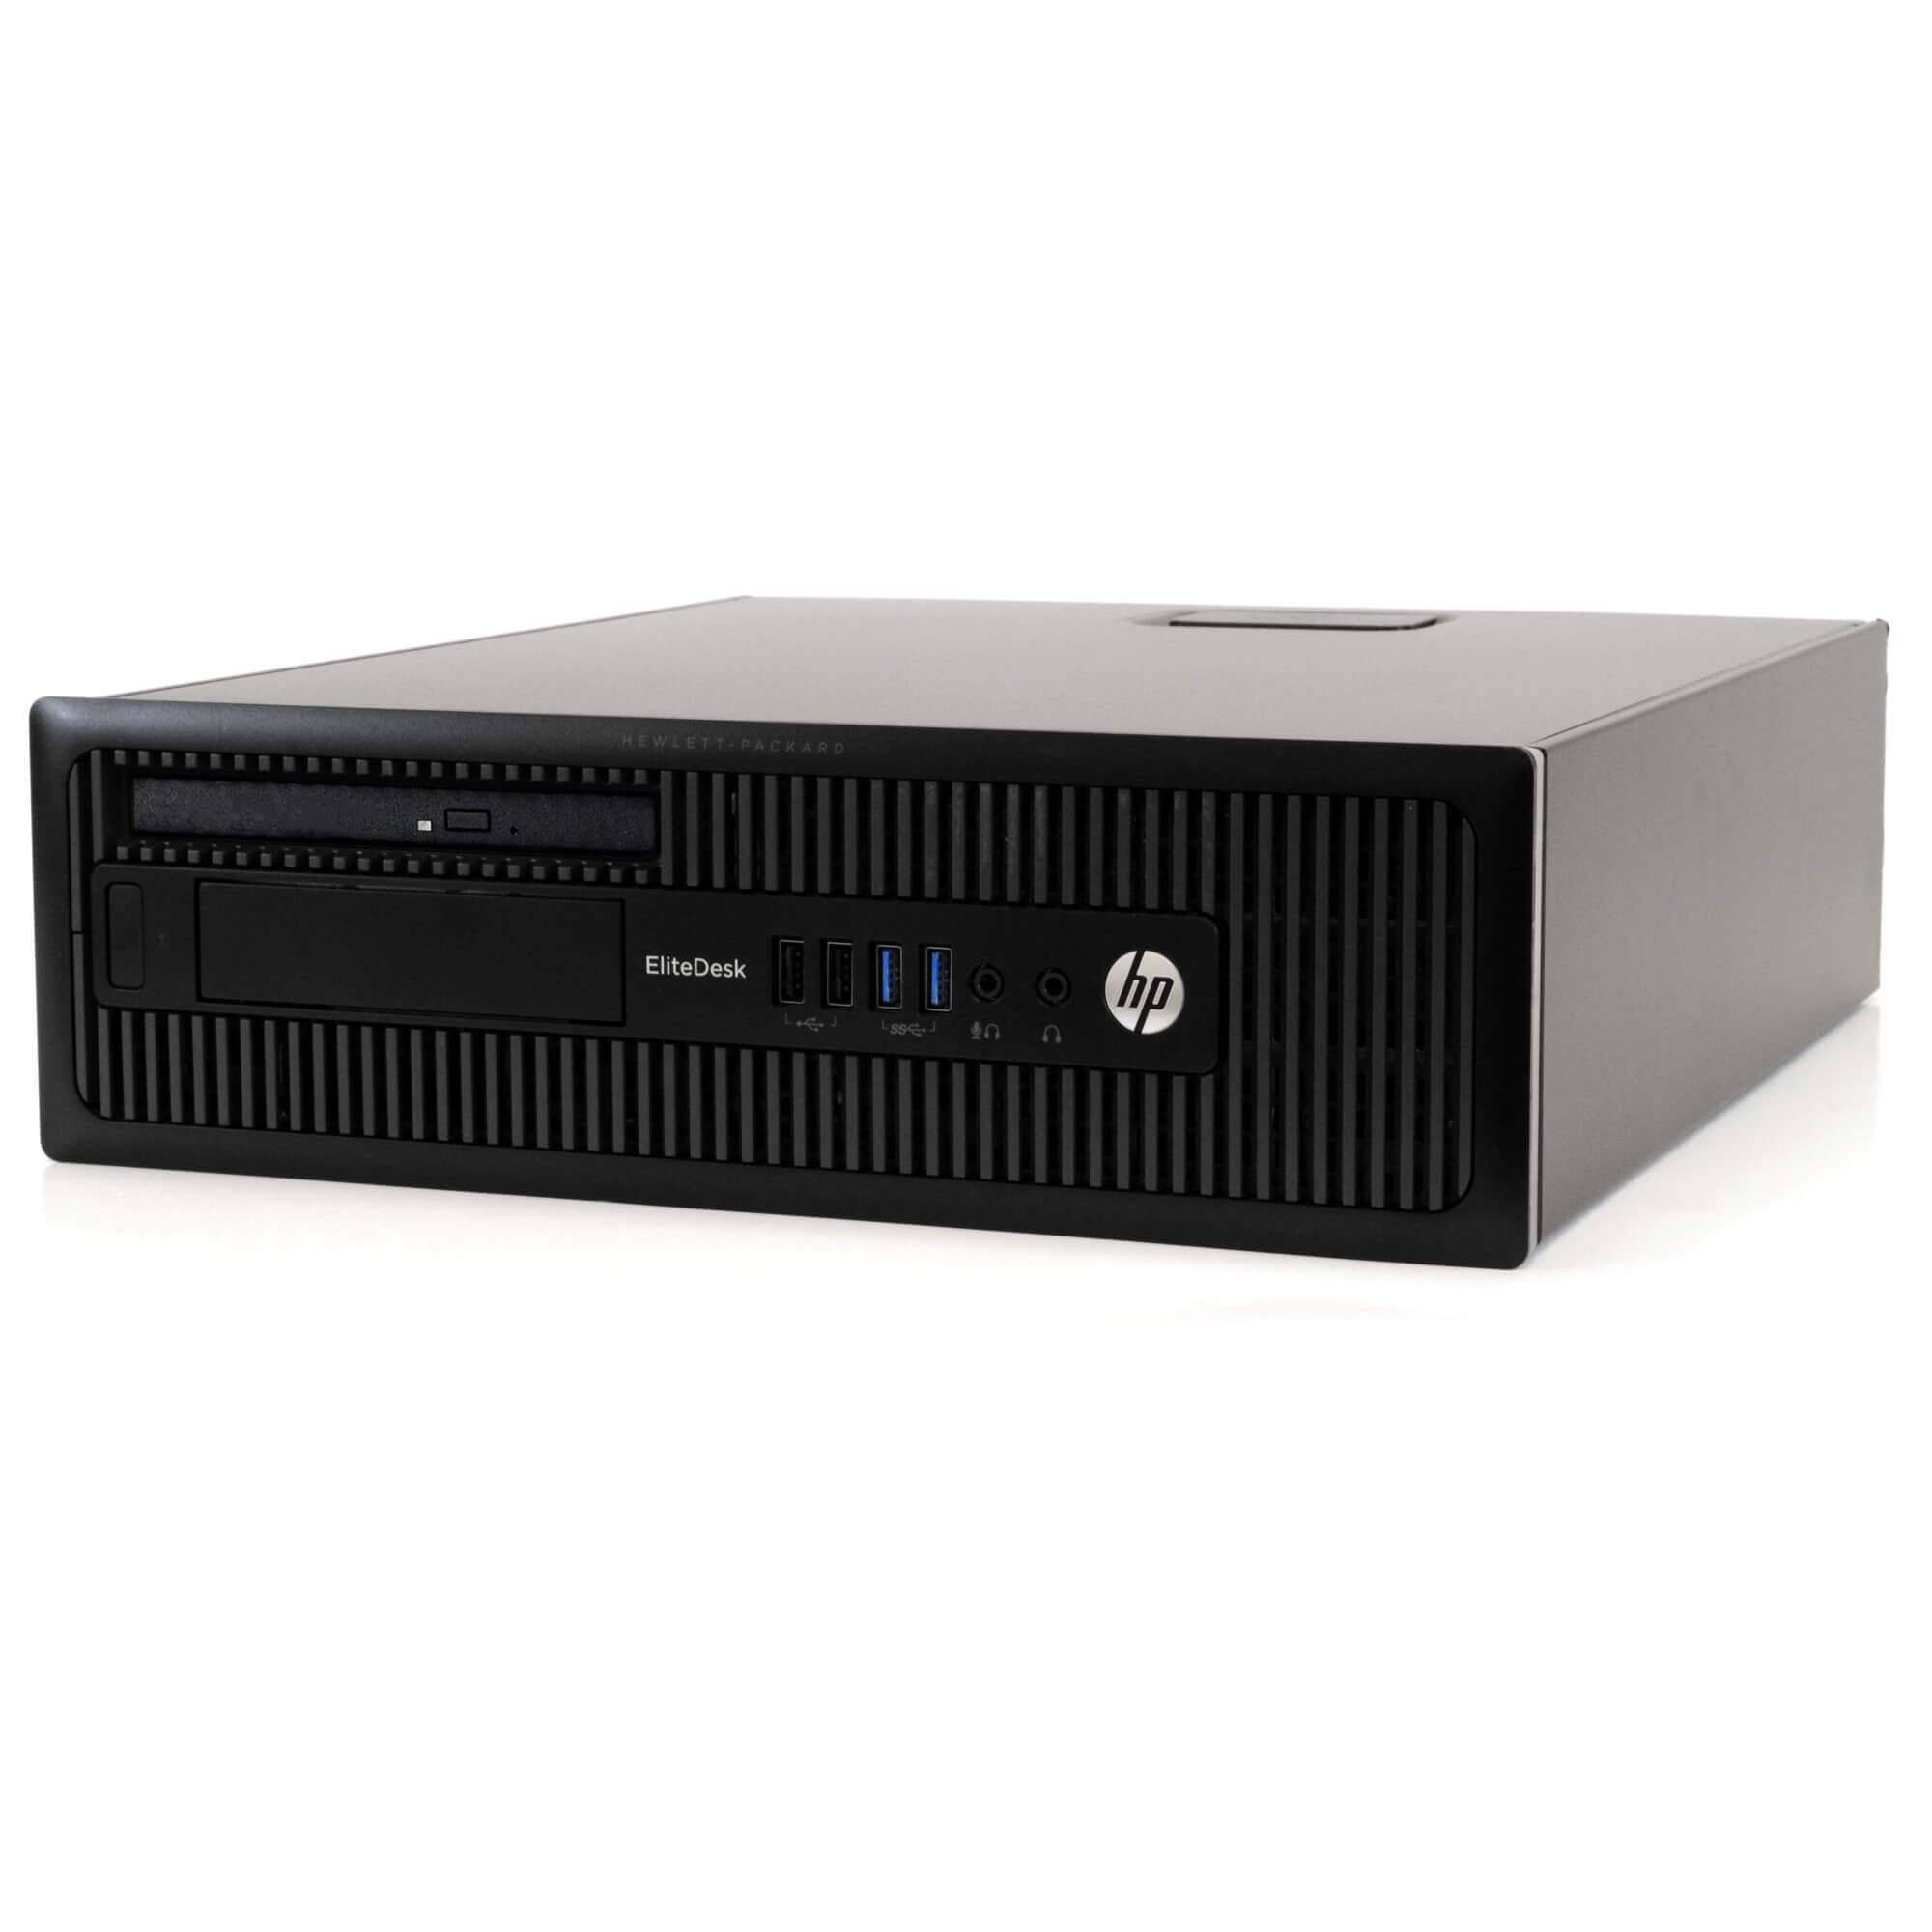 HP EliteDesk 800G1 Small Form Desktop Computer Tower PC (Intel Quad Core i5-4570, 16GB Ram, 240GB Solid State Drive, WiFi and HDMI Adapters) Win 10 Pro (Renewed) (800G1 HDMI)